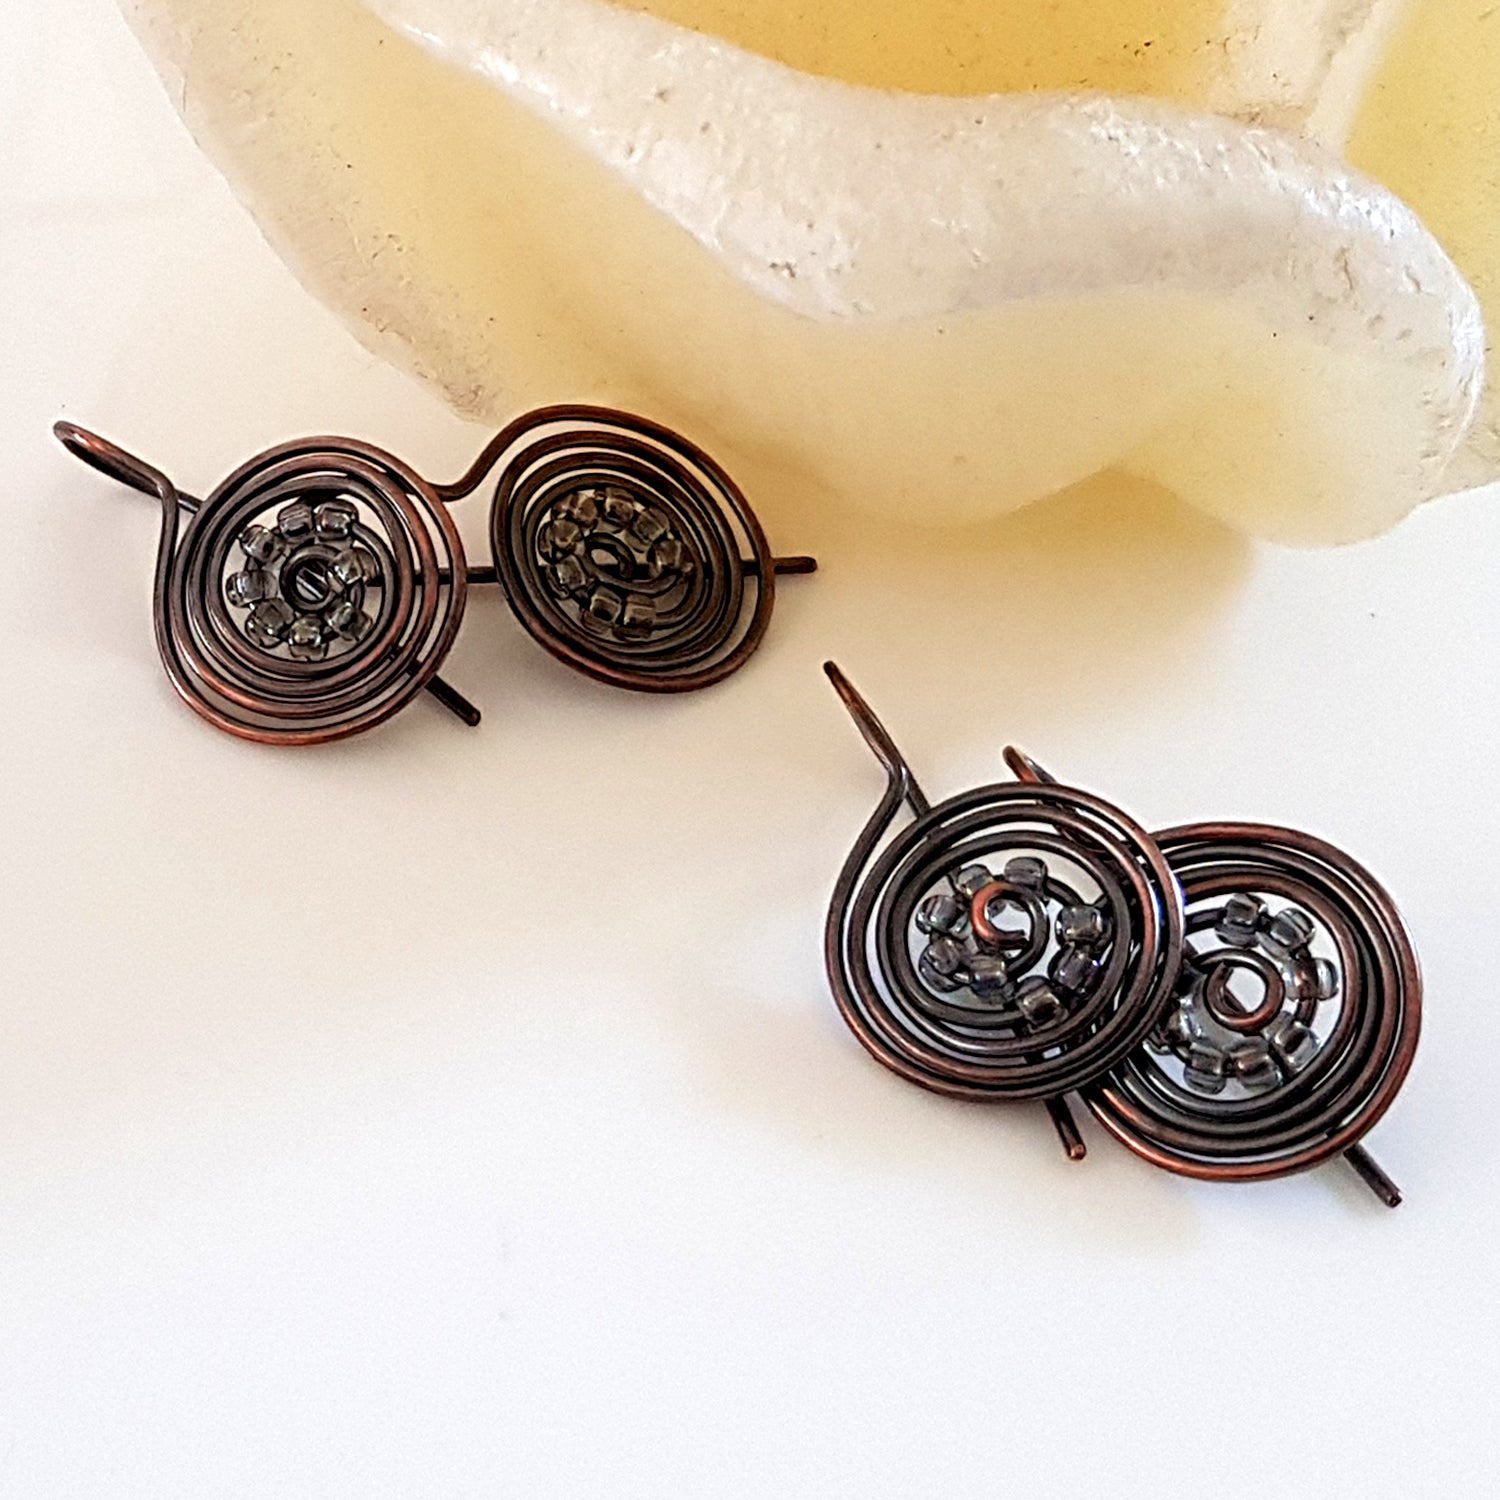 Small Stud Earrings Handmade Copper Wire And Beads Jewelry Stock Photo   Download Image Now  iStock